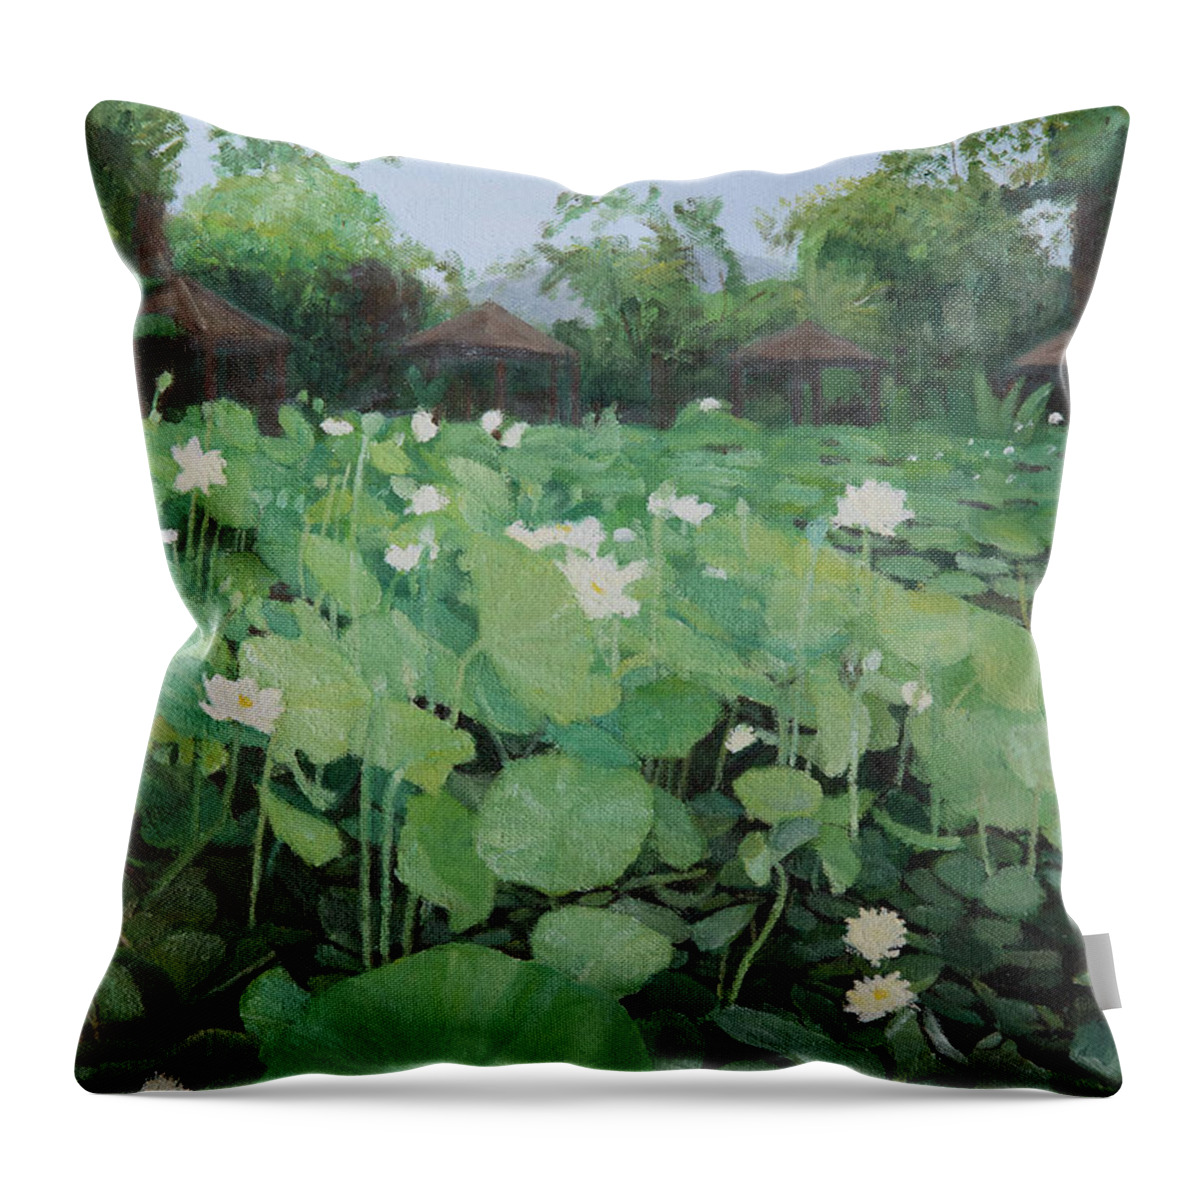 Flower Throw Pillow featuring the painting Waterlily #2 by Masami IIDA